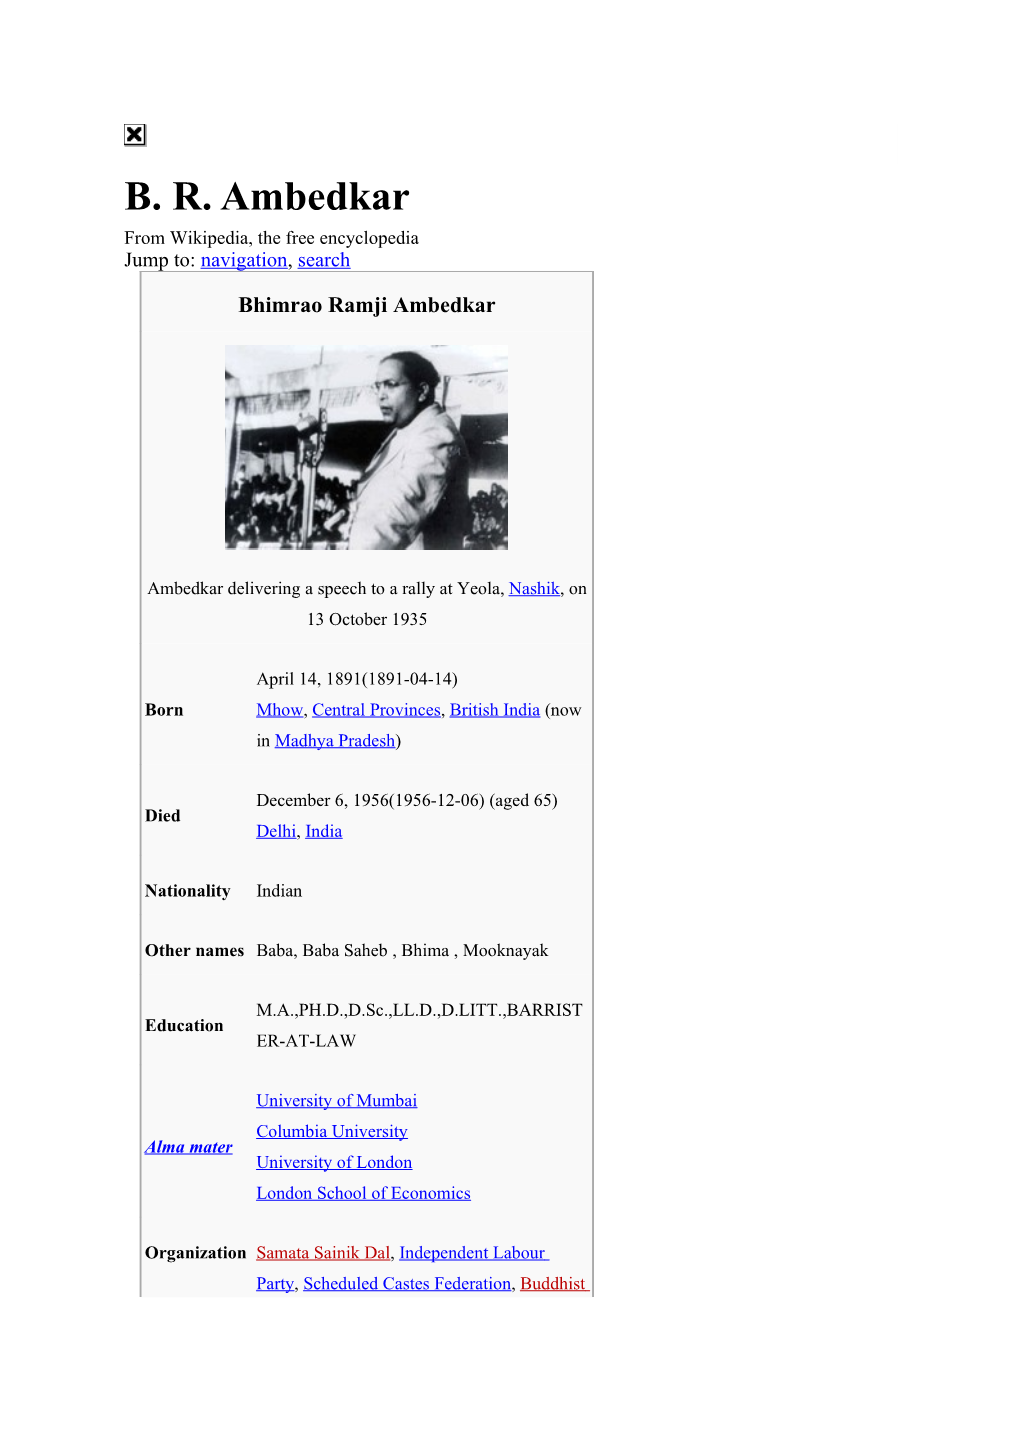 B. R. Ambedkar from Wikipedia, the Free Encyclopedia Jump To: Navigation, Search